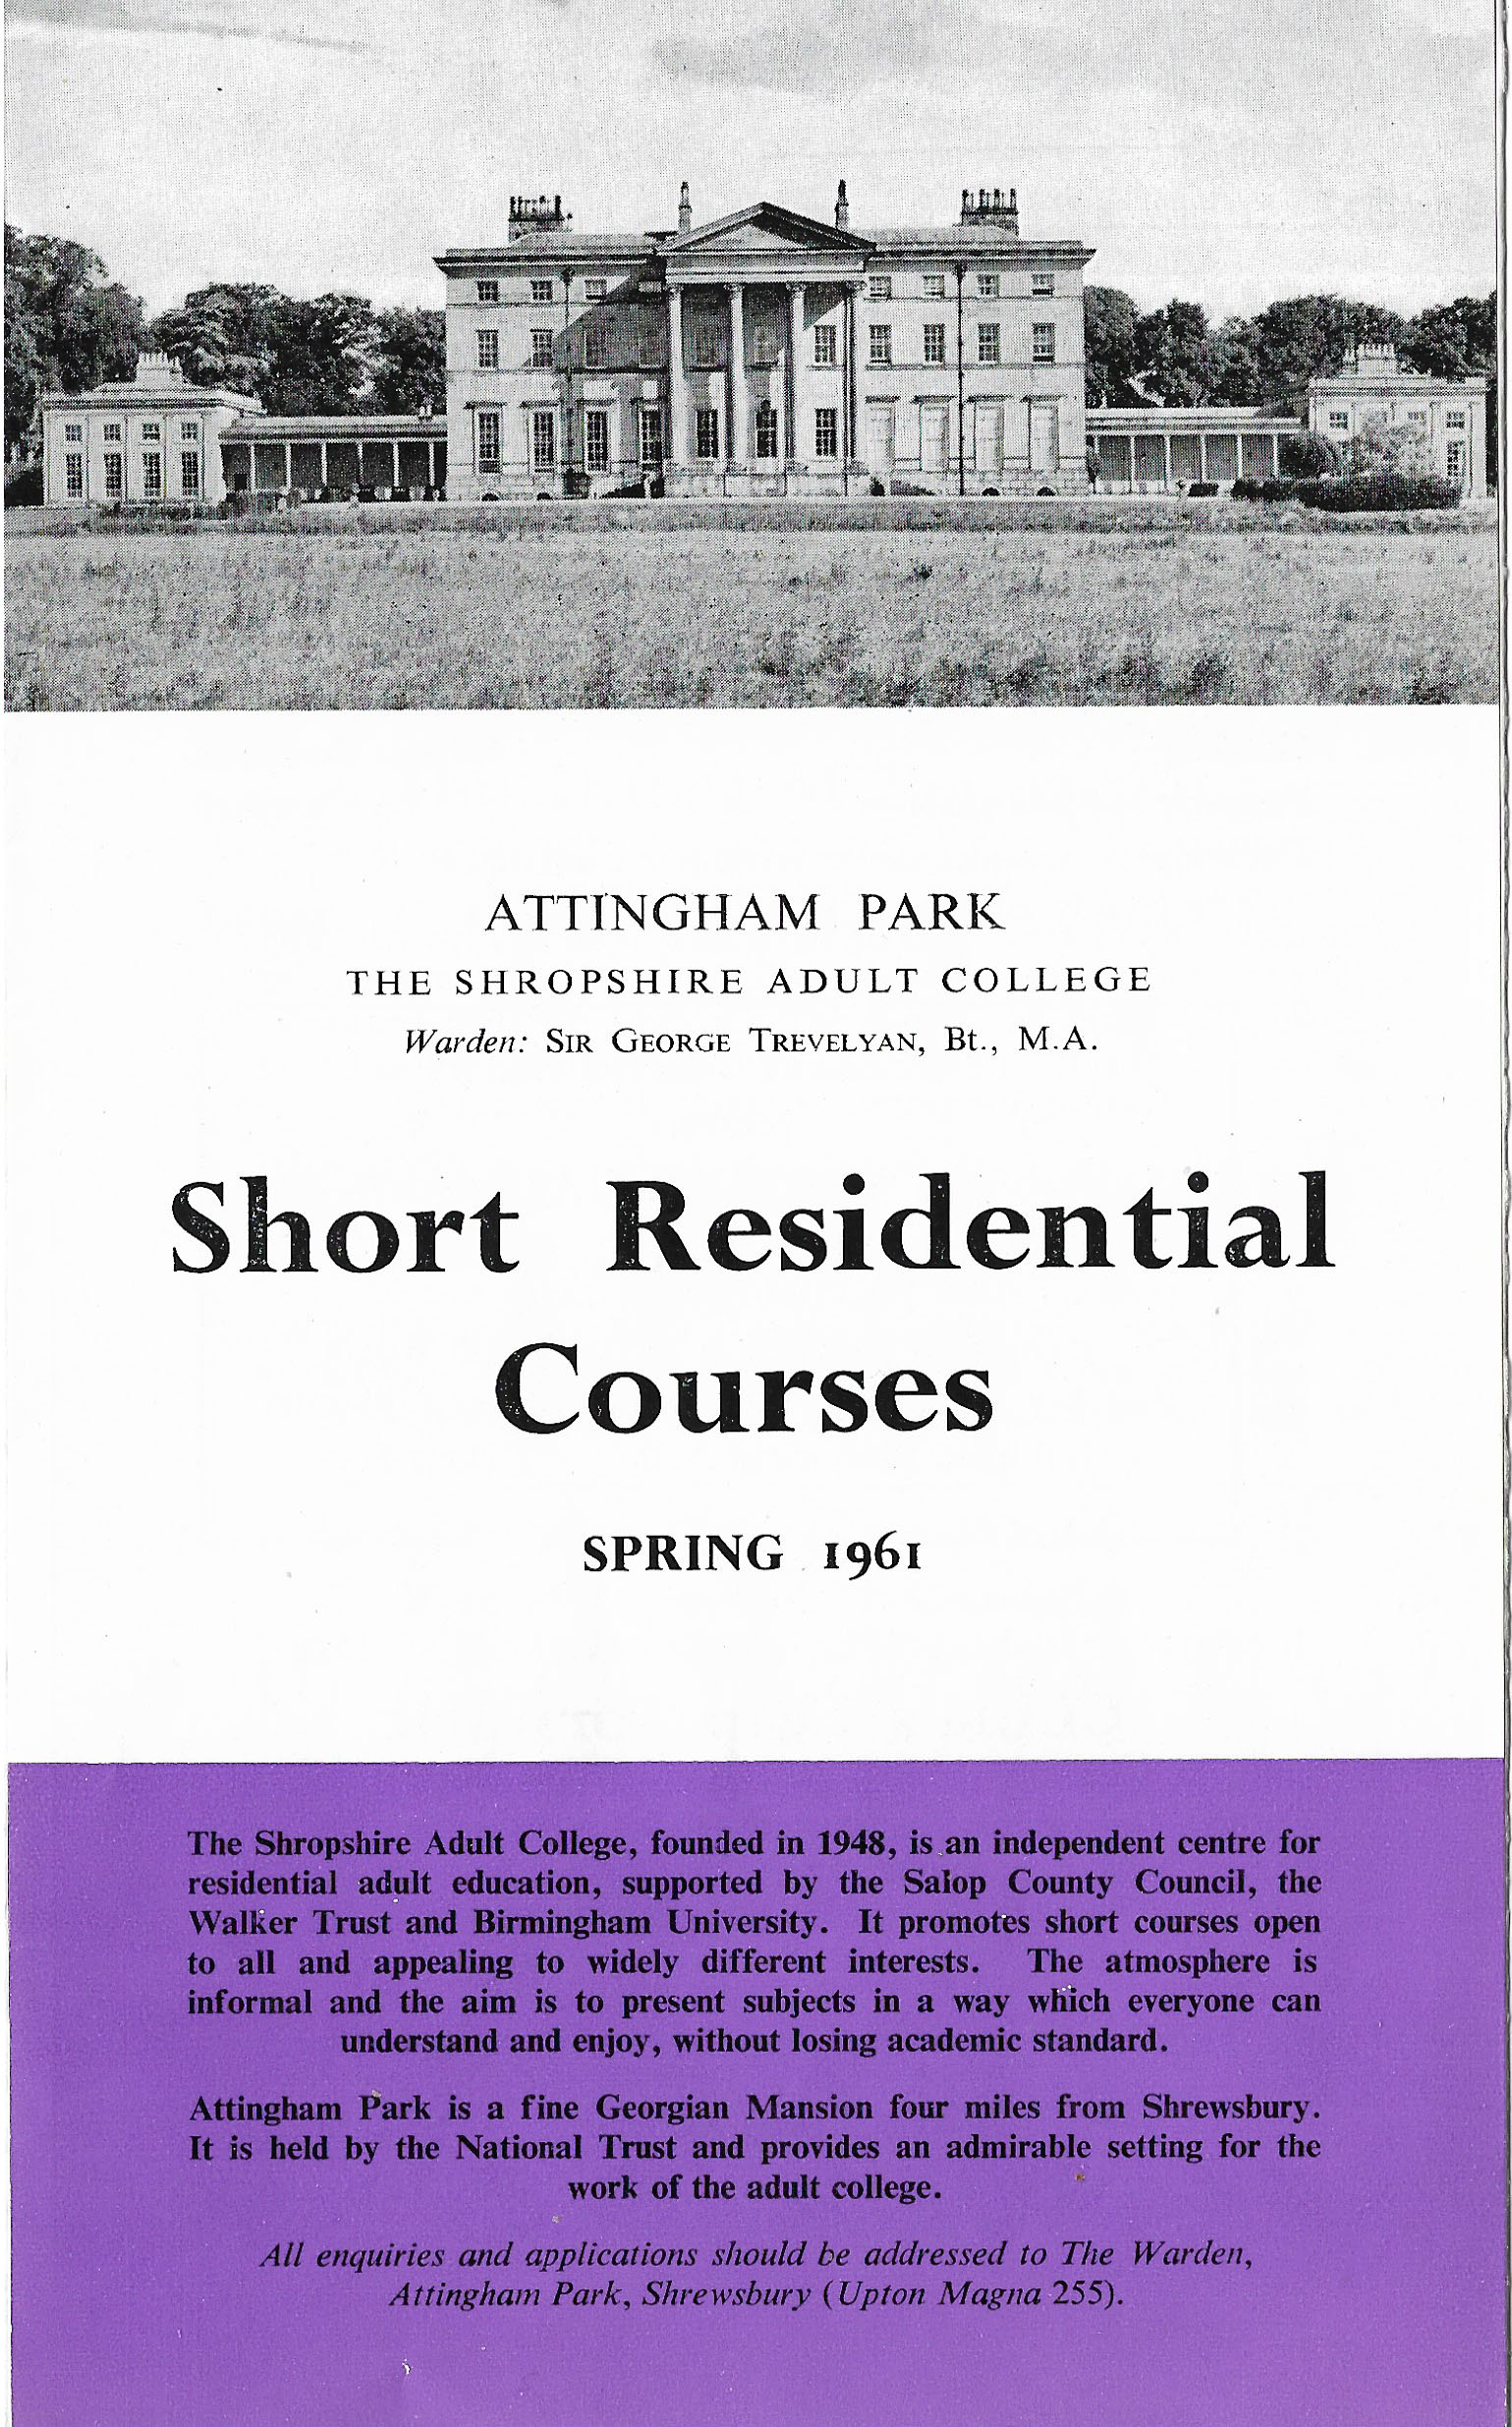 1961 course_front.jpg